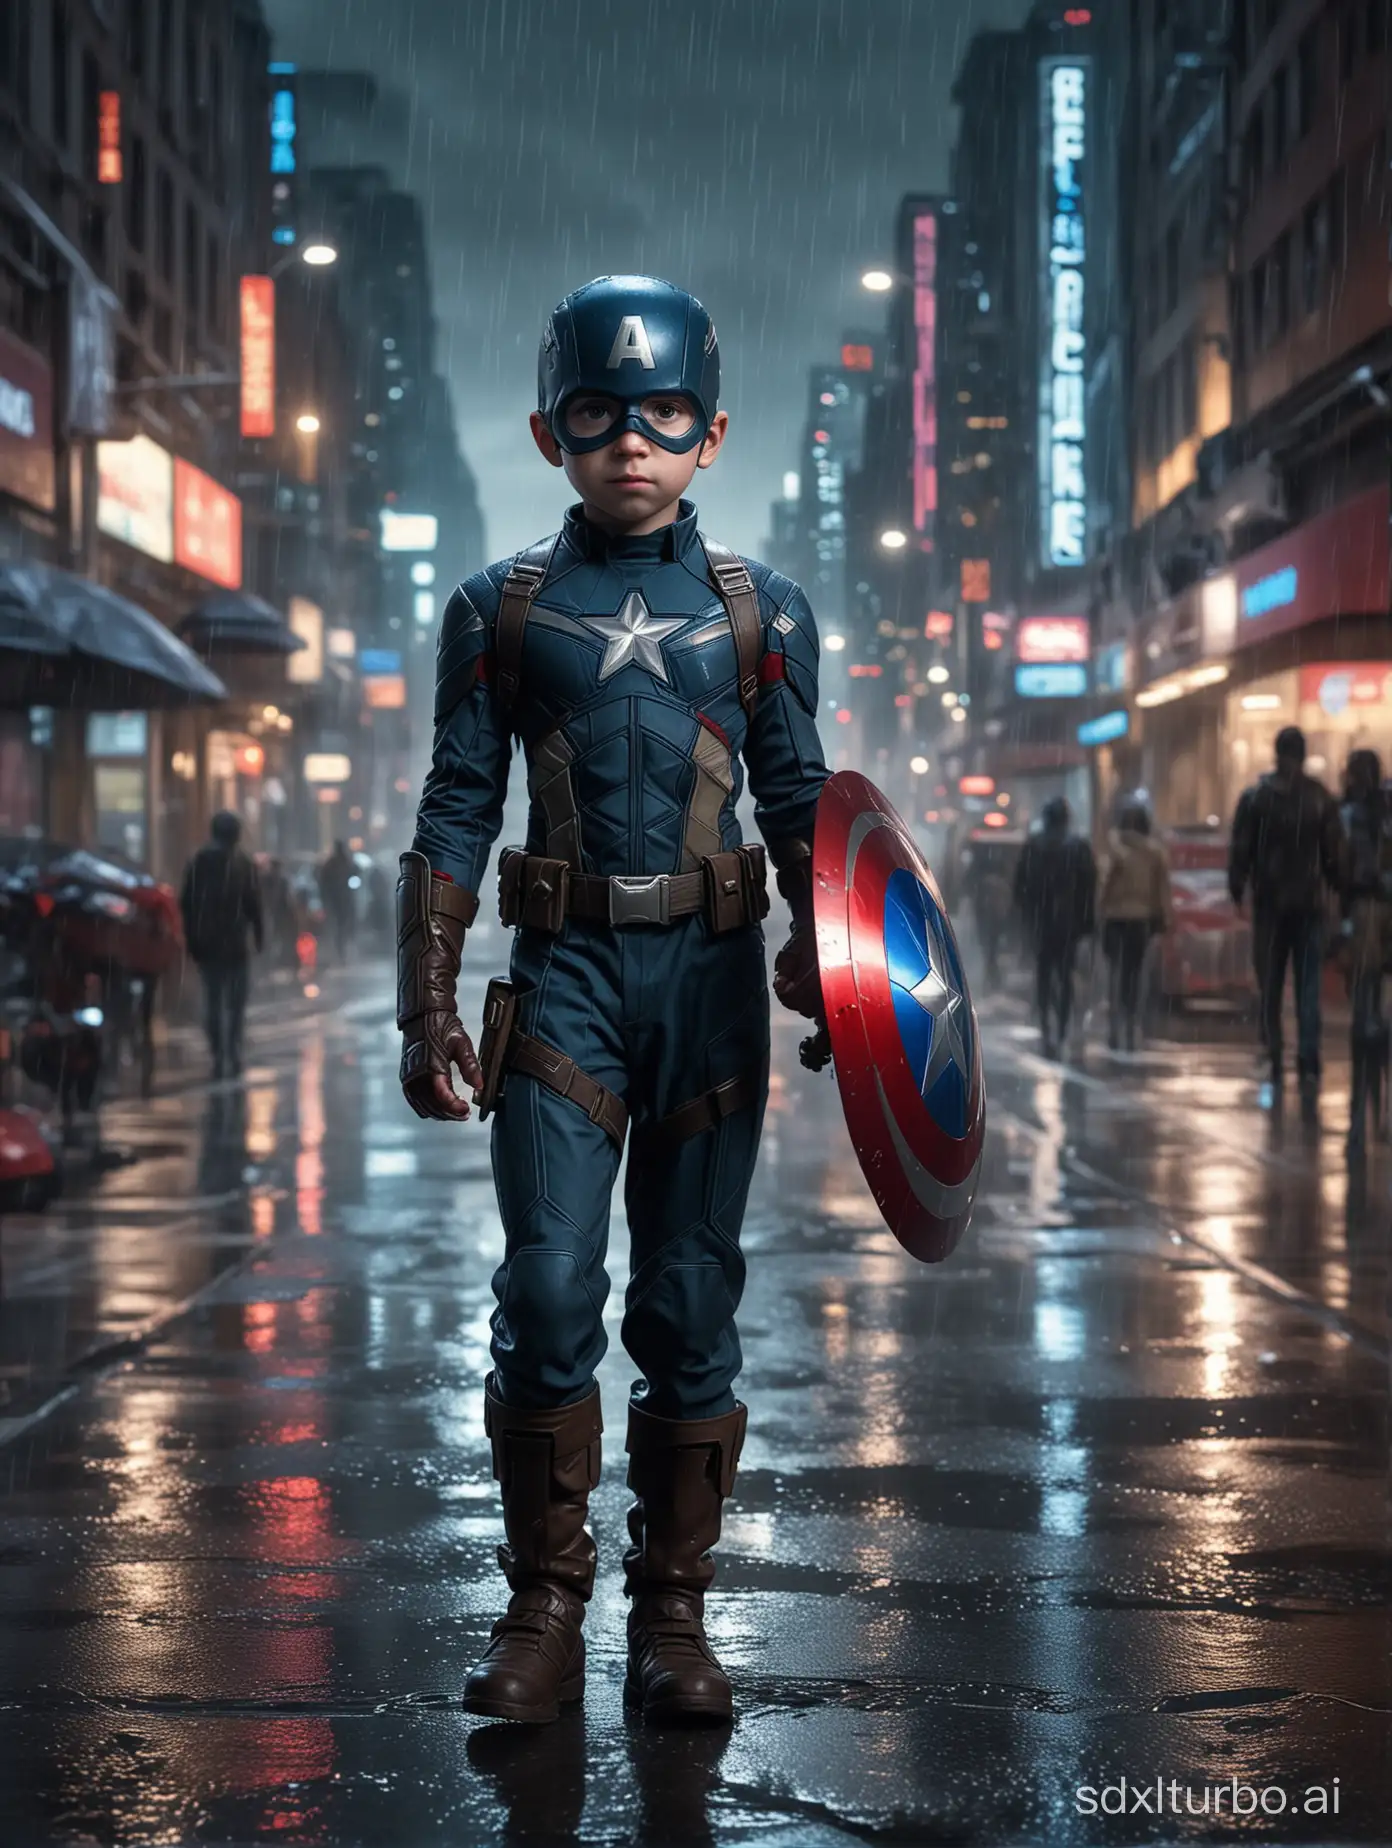 Science fiction, a child dressed as Captain America stands on a wet road, able to see the facial features, with the background of a cyber-style city night scene, slightly dark,